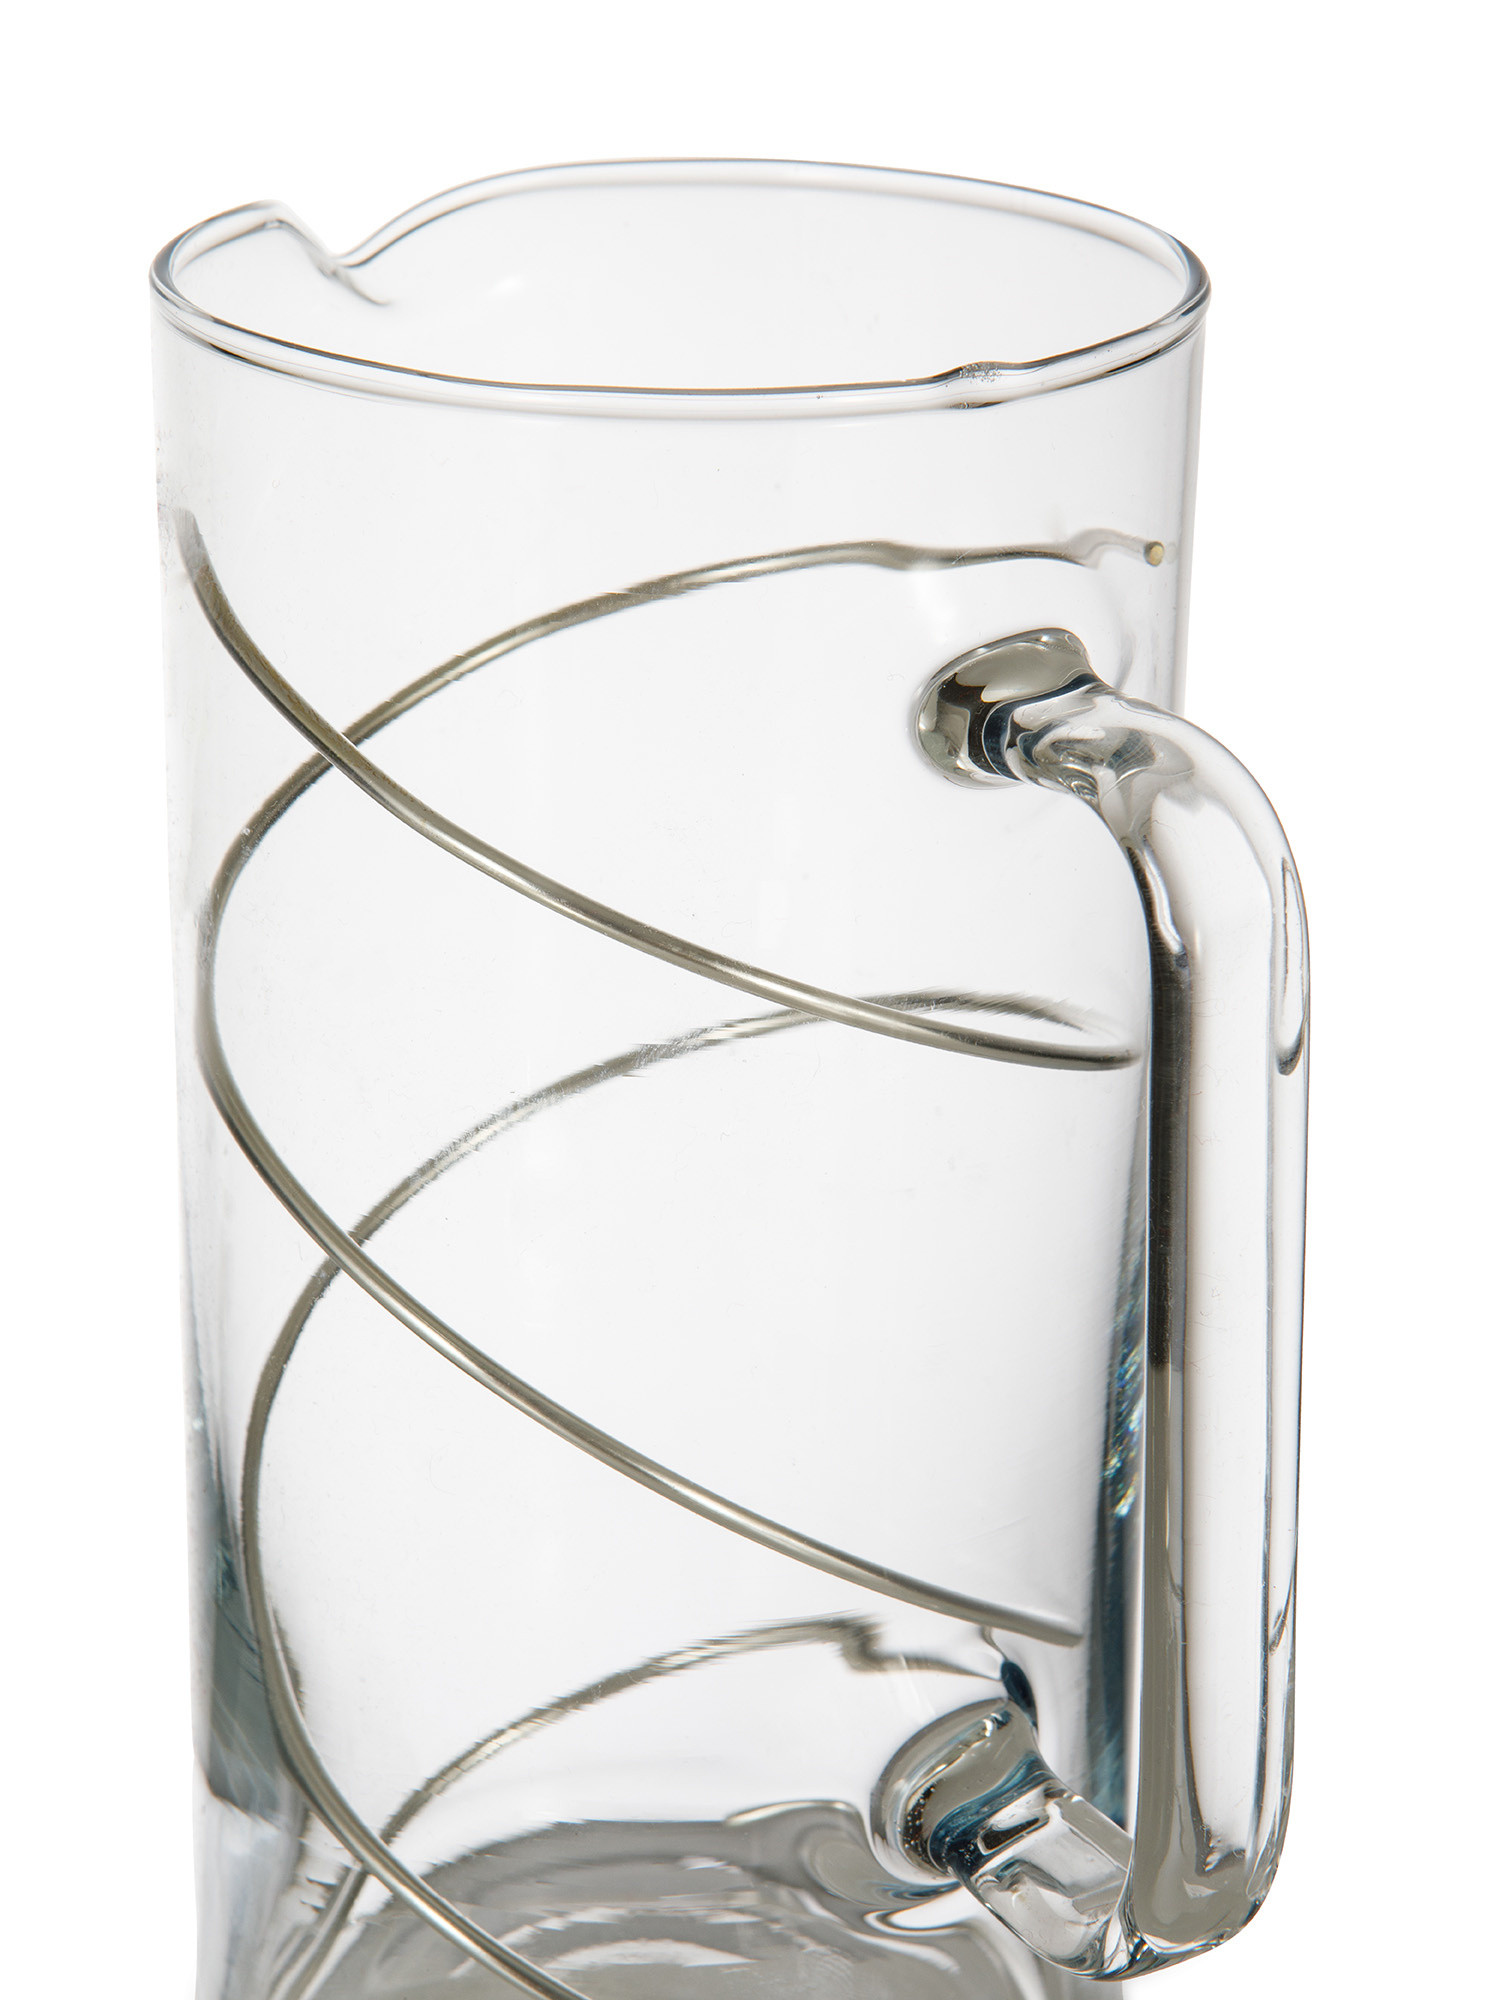 Glass carafe with purifying 925 silver spiral, Silver Grey, large image number 1